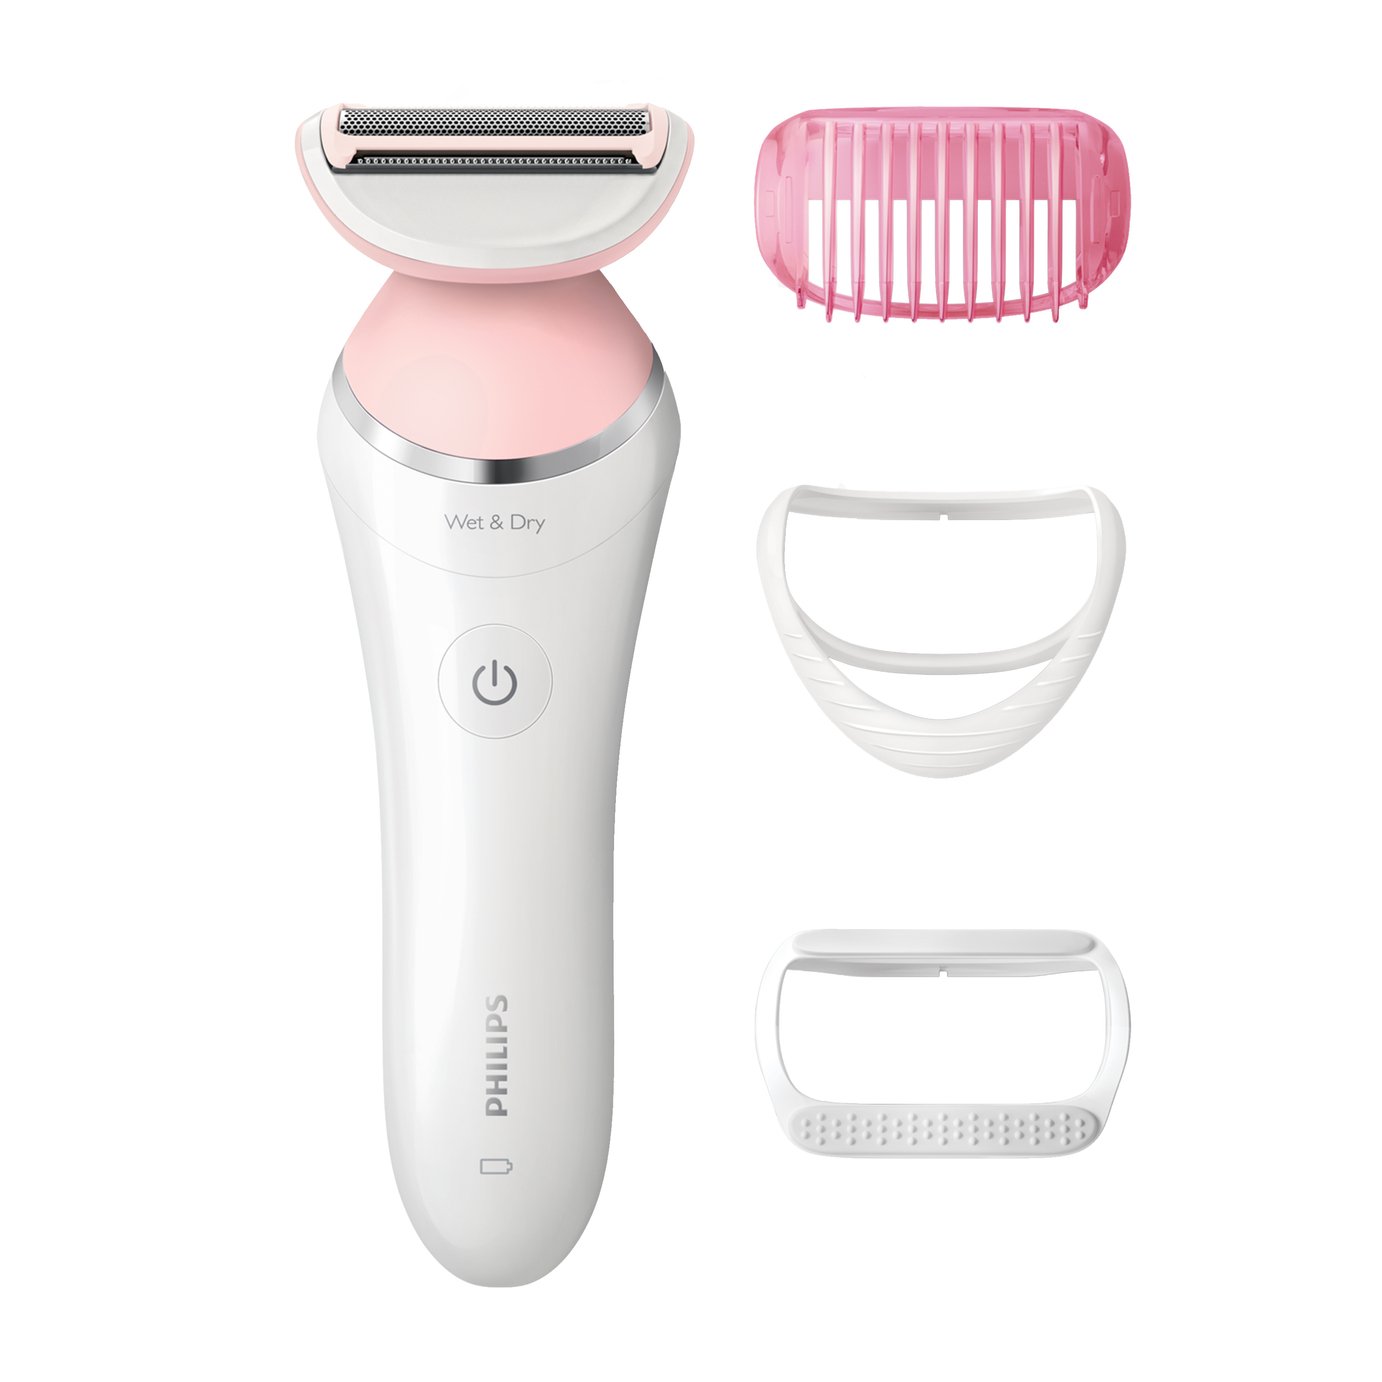 Philips SatinShave Wet & Dry Advanced Electric Ladyshaver